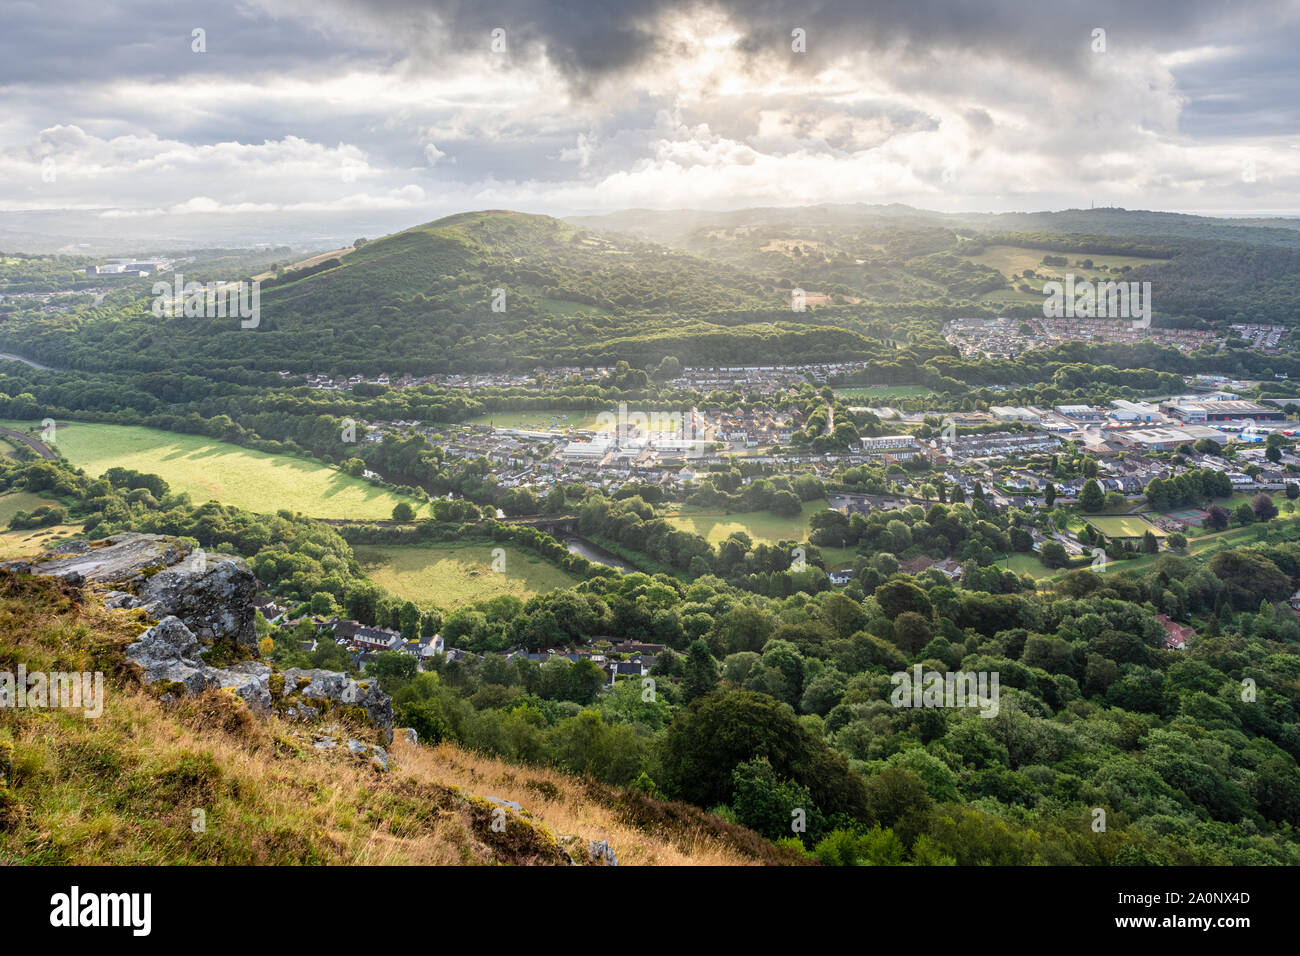 Morning light illuminates the hills and valleys of South Wales with the towns of Taff's Well and Caerphilly as seen from The Garth Mountain. Stock Photo